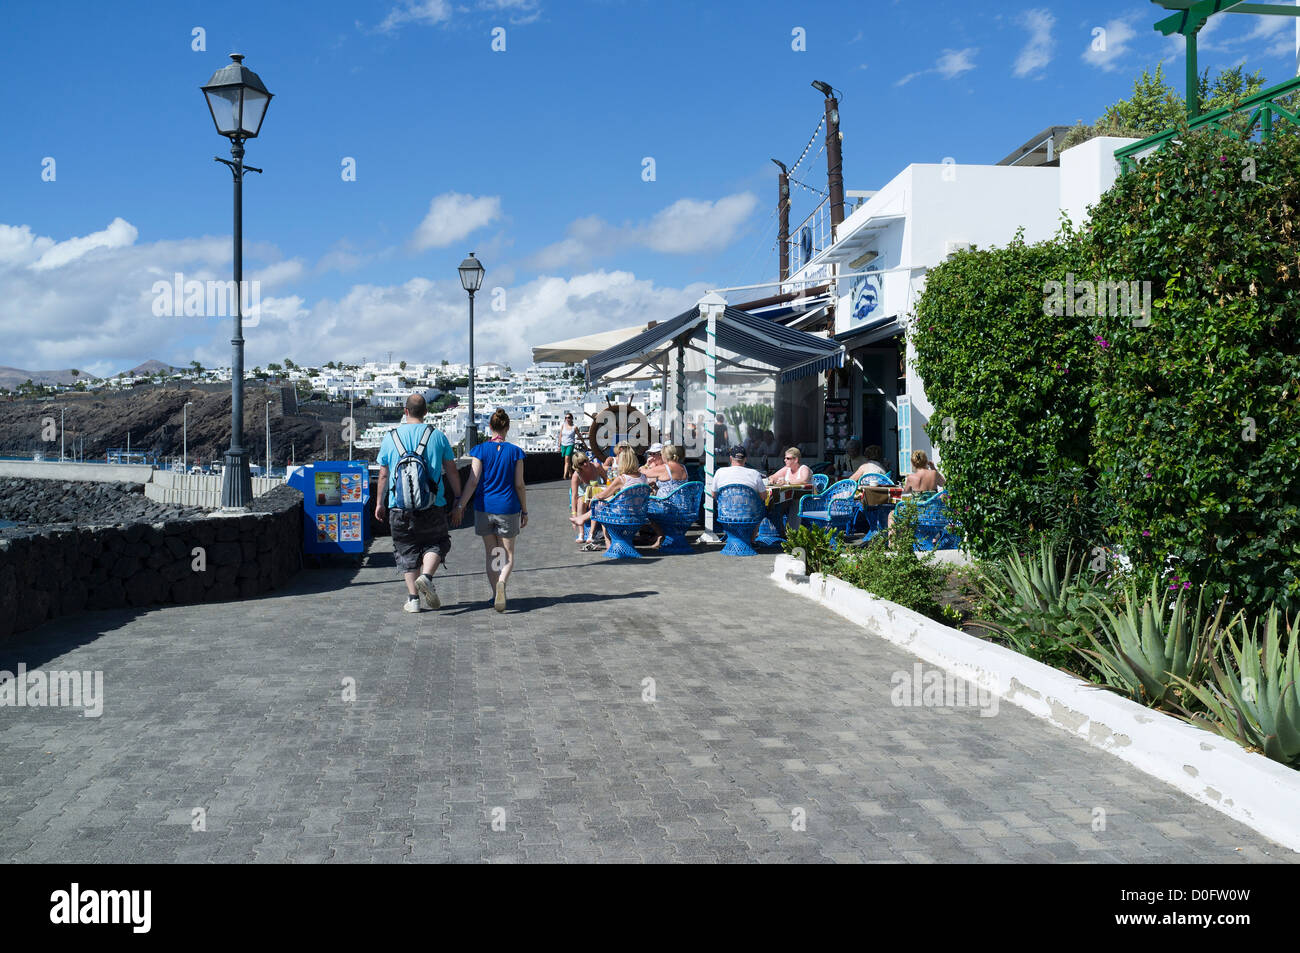 dh  PUERTO DEL CARMEN LANZAROTE Tourist couple walking by outdoor cafe people sitting relaxing holiday Stock Photo